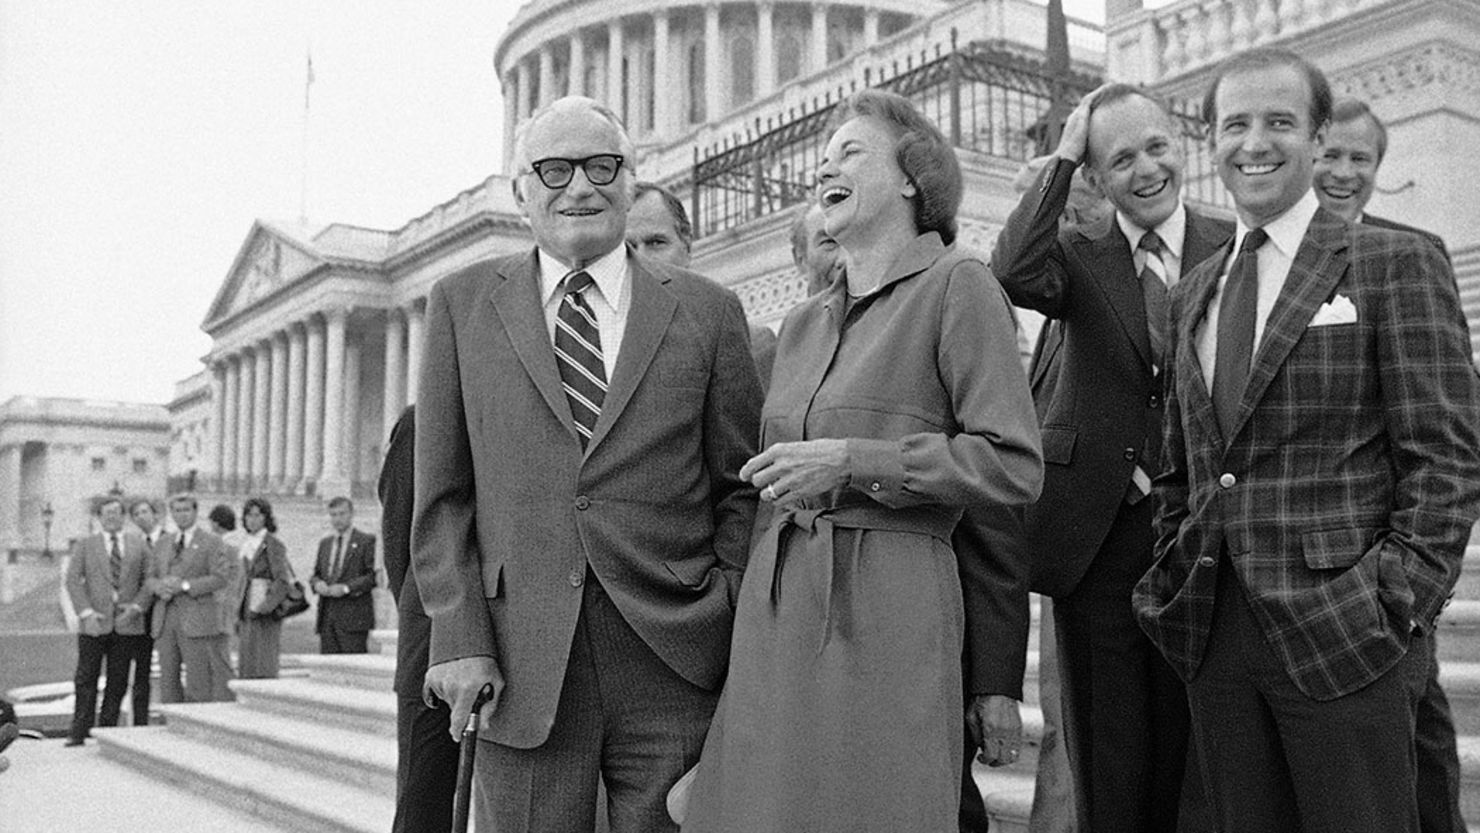 In this September 21, 1981 photo, Sandra Day O'Connor laughs as she stands alongside Sen. Barry Goldwater following her confirmation on Capitol Hill by the Senate to become an associate justice of the Supreme Court.